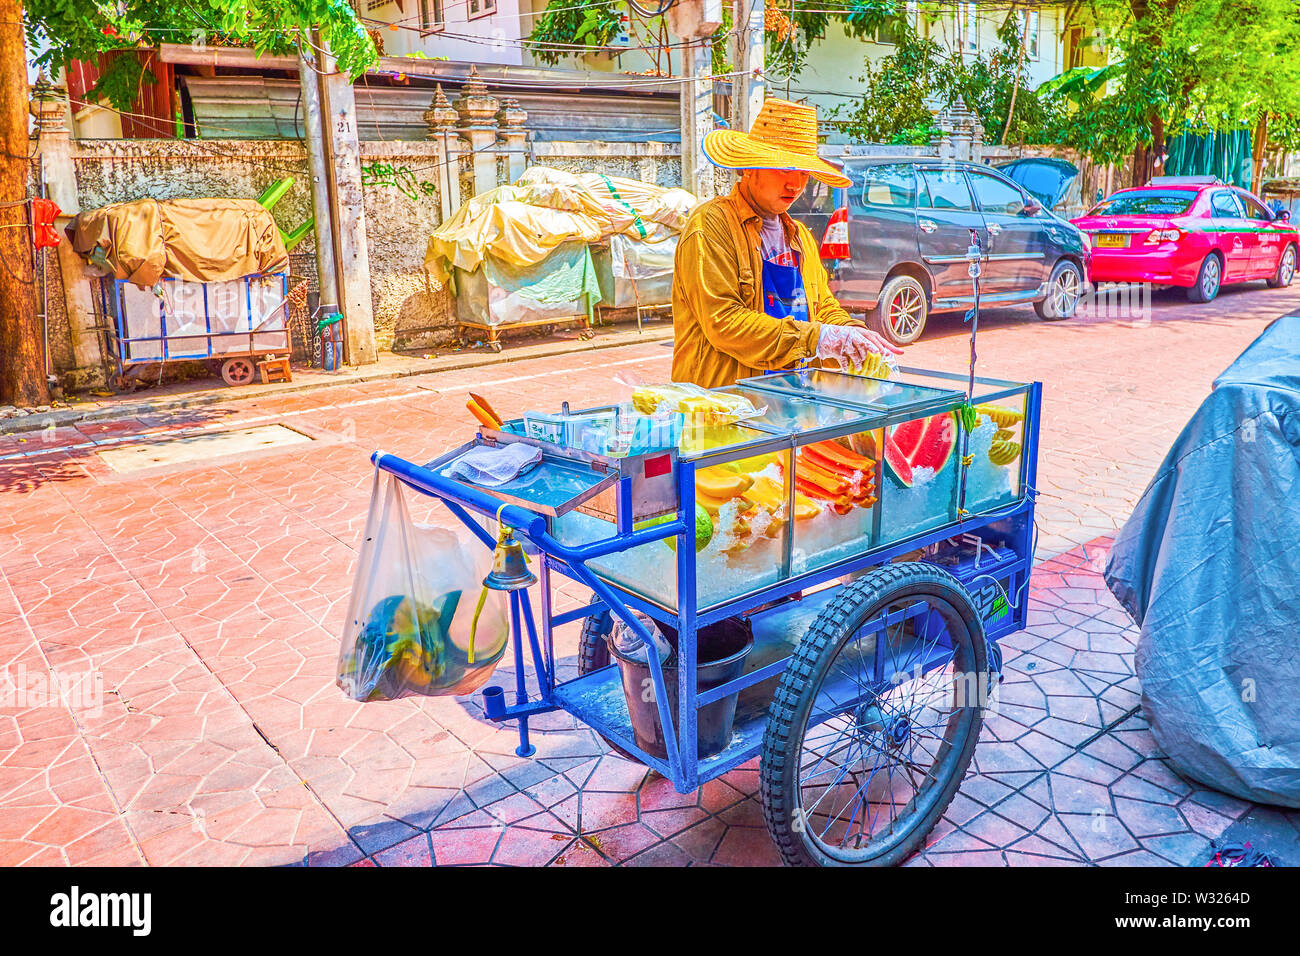 BANGKOK, THAILAND - APRIL 22, 2019: The merchant sells fresh fruits, the heaps of them lie in ice in the glass showcase of his cart, on April 22 in Ba Stock Photo